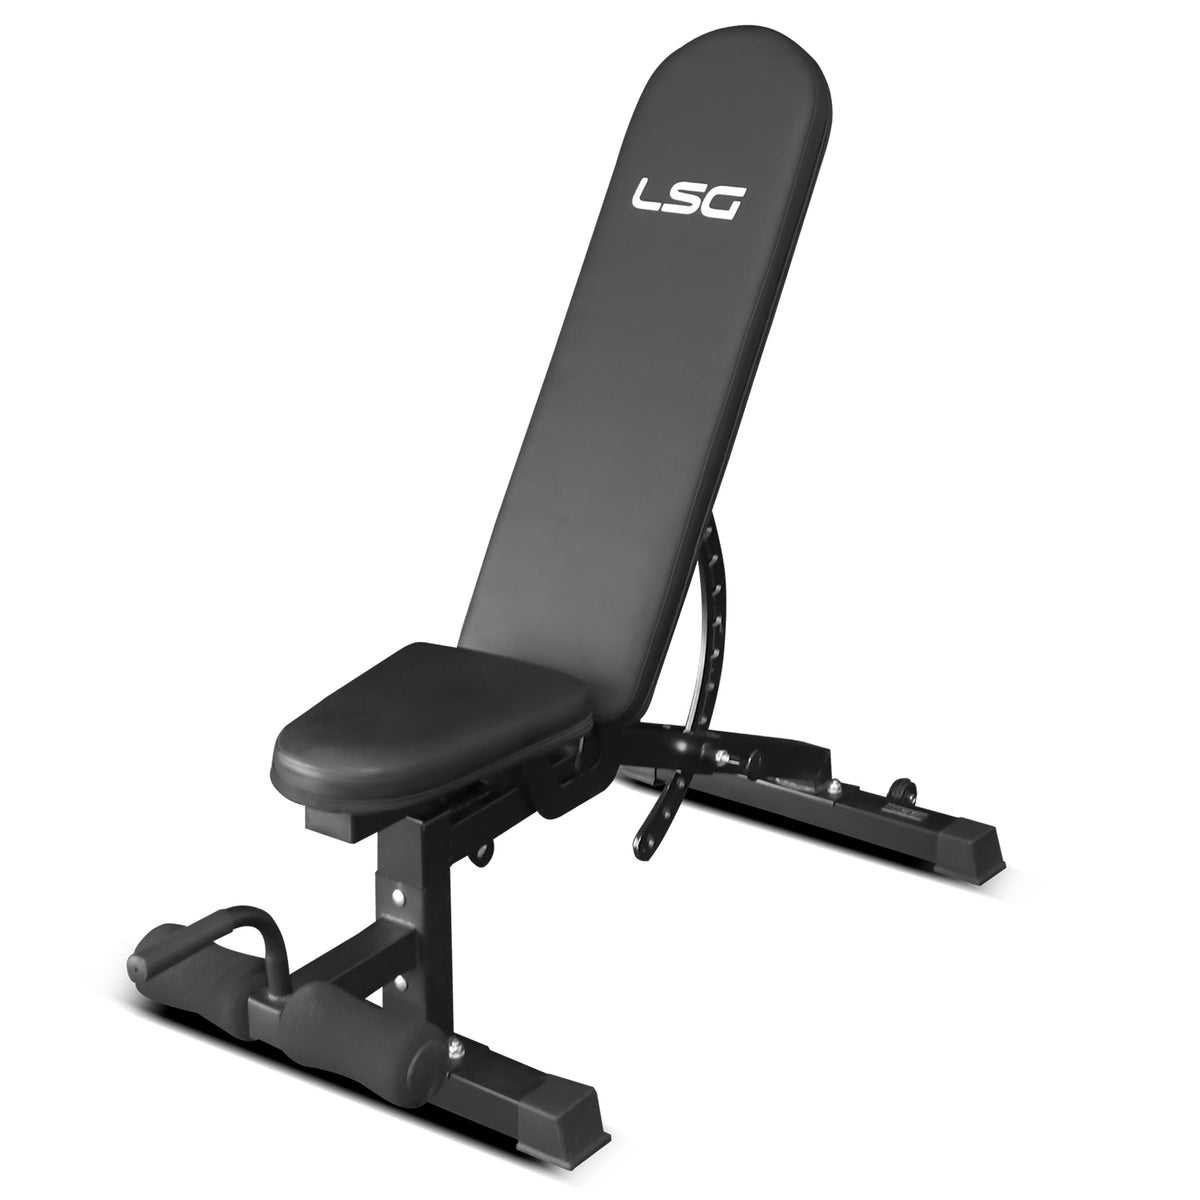 LSG GBN006 FID Bench with 84kg Weight and Bar set